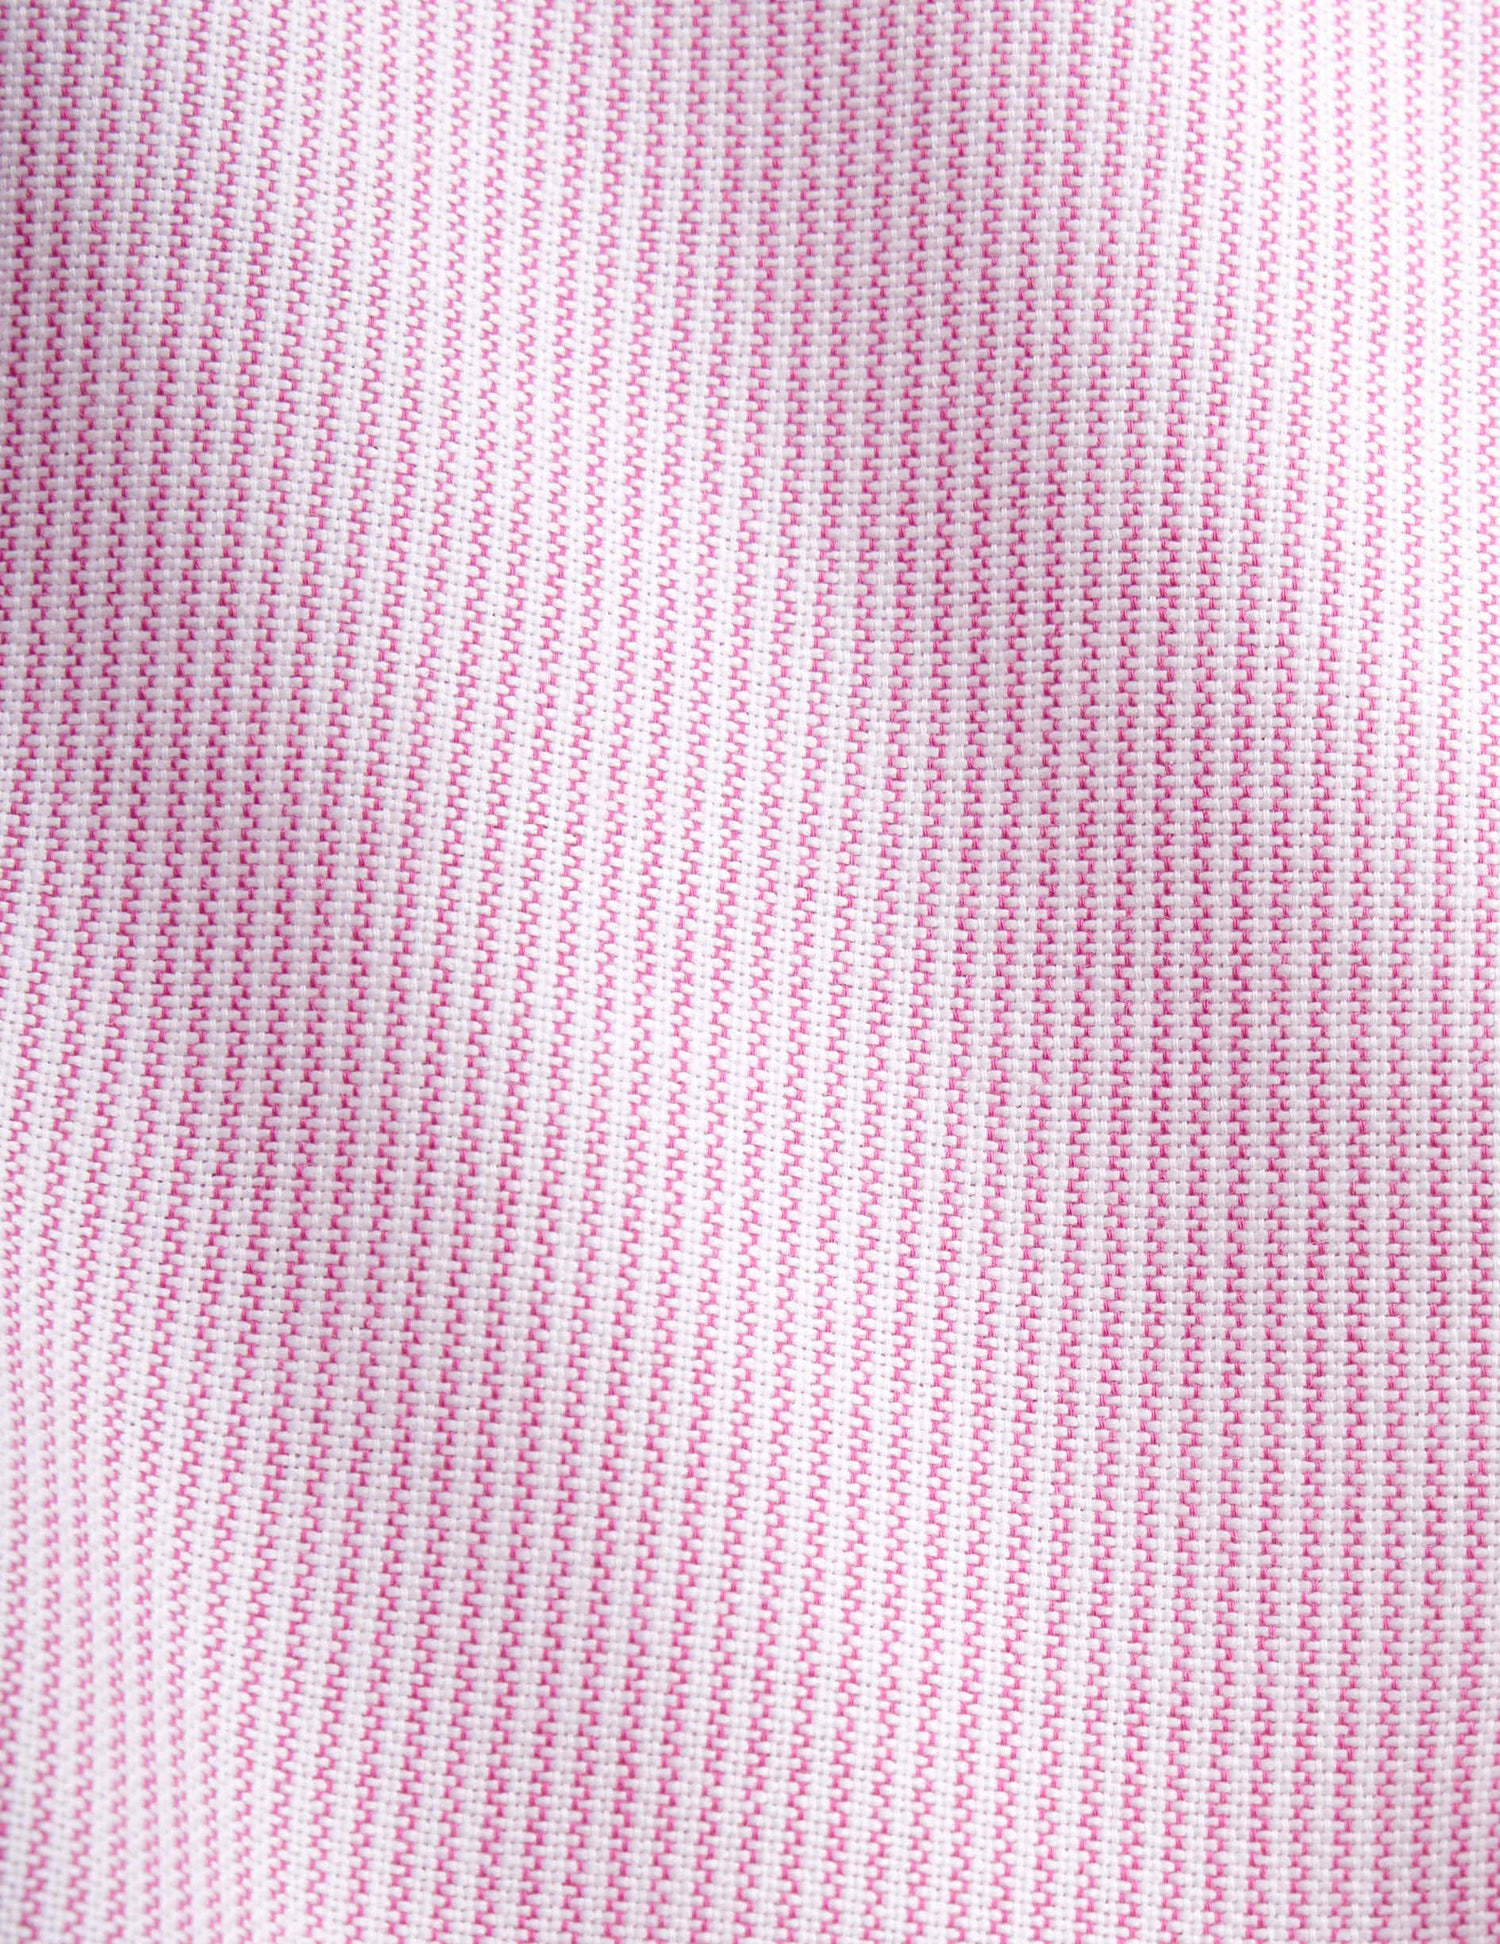 Striped pink Carl shirt - Oxford - Open straight Collar#5